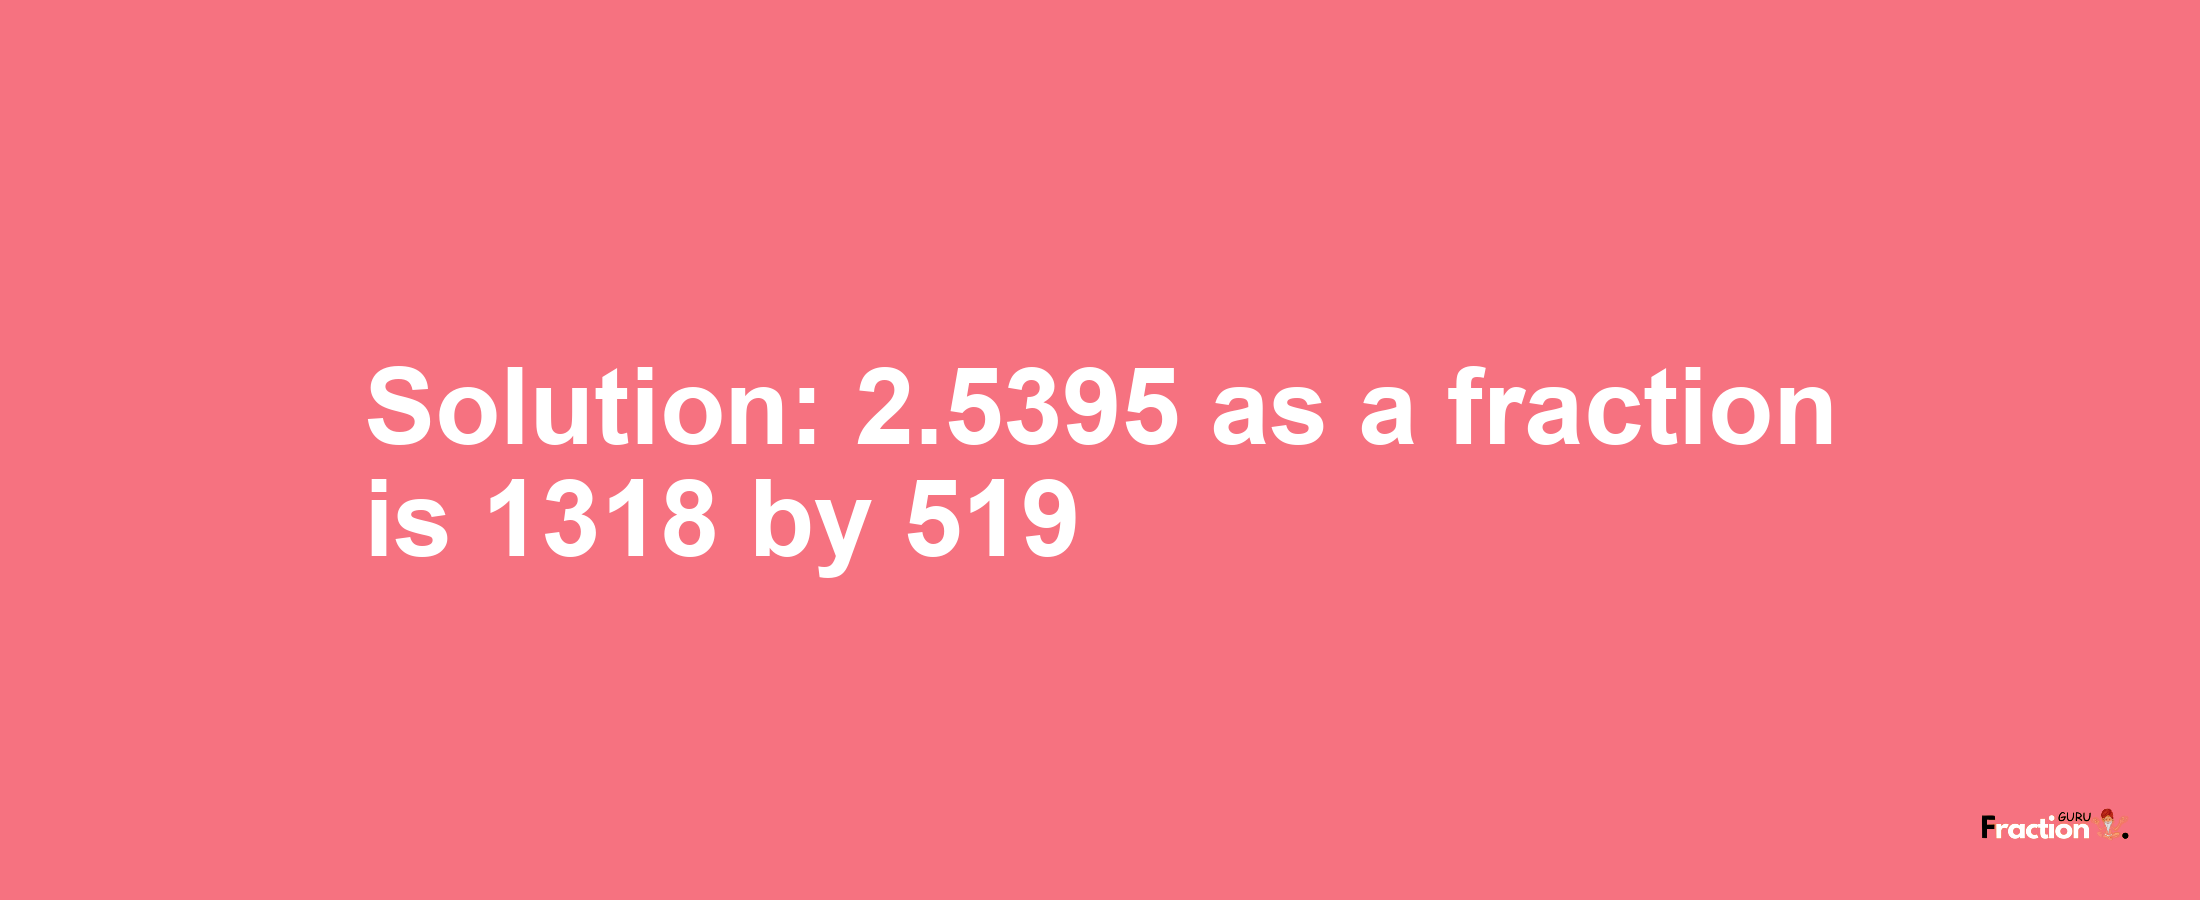 Solution:2.5395 as a fraction is 1318/519